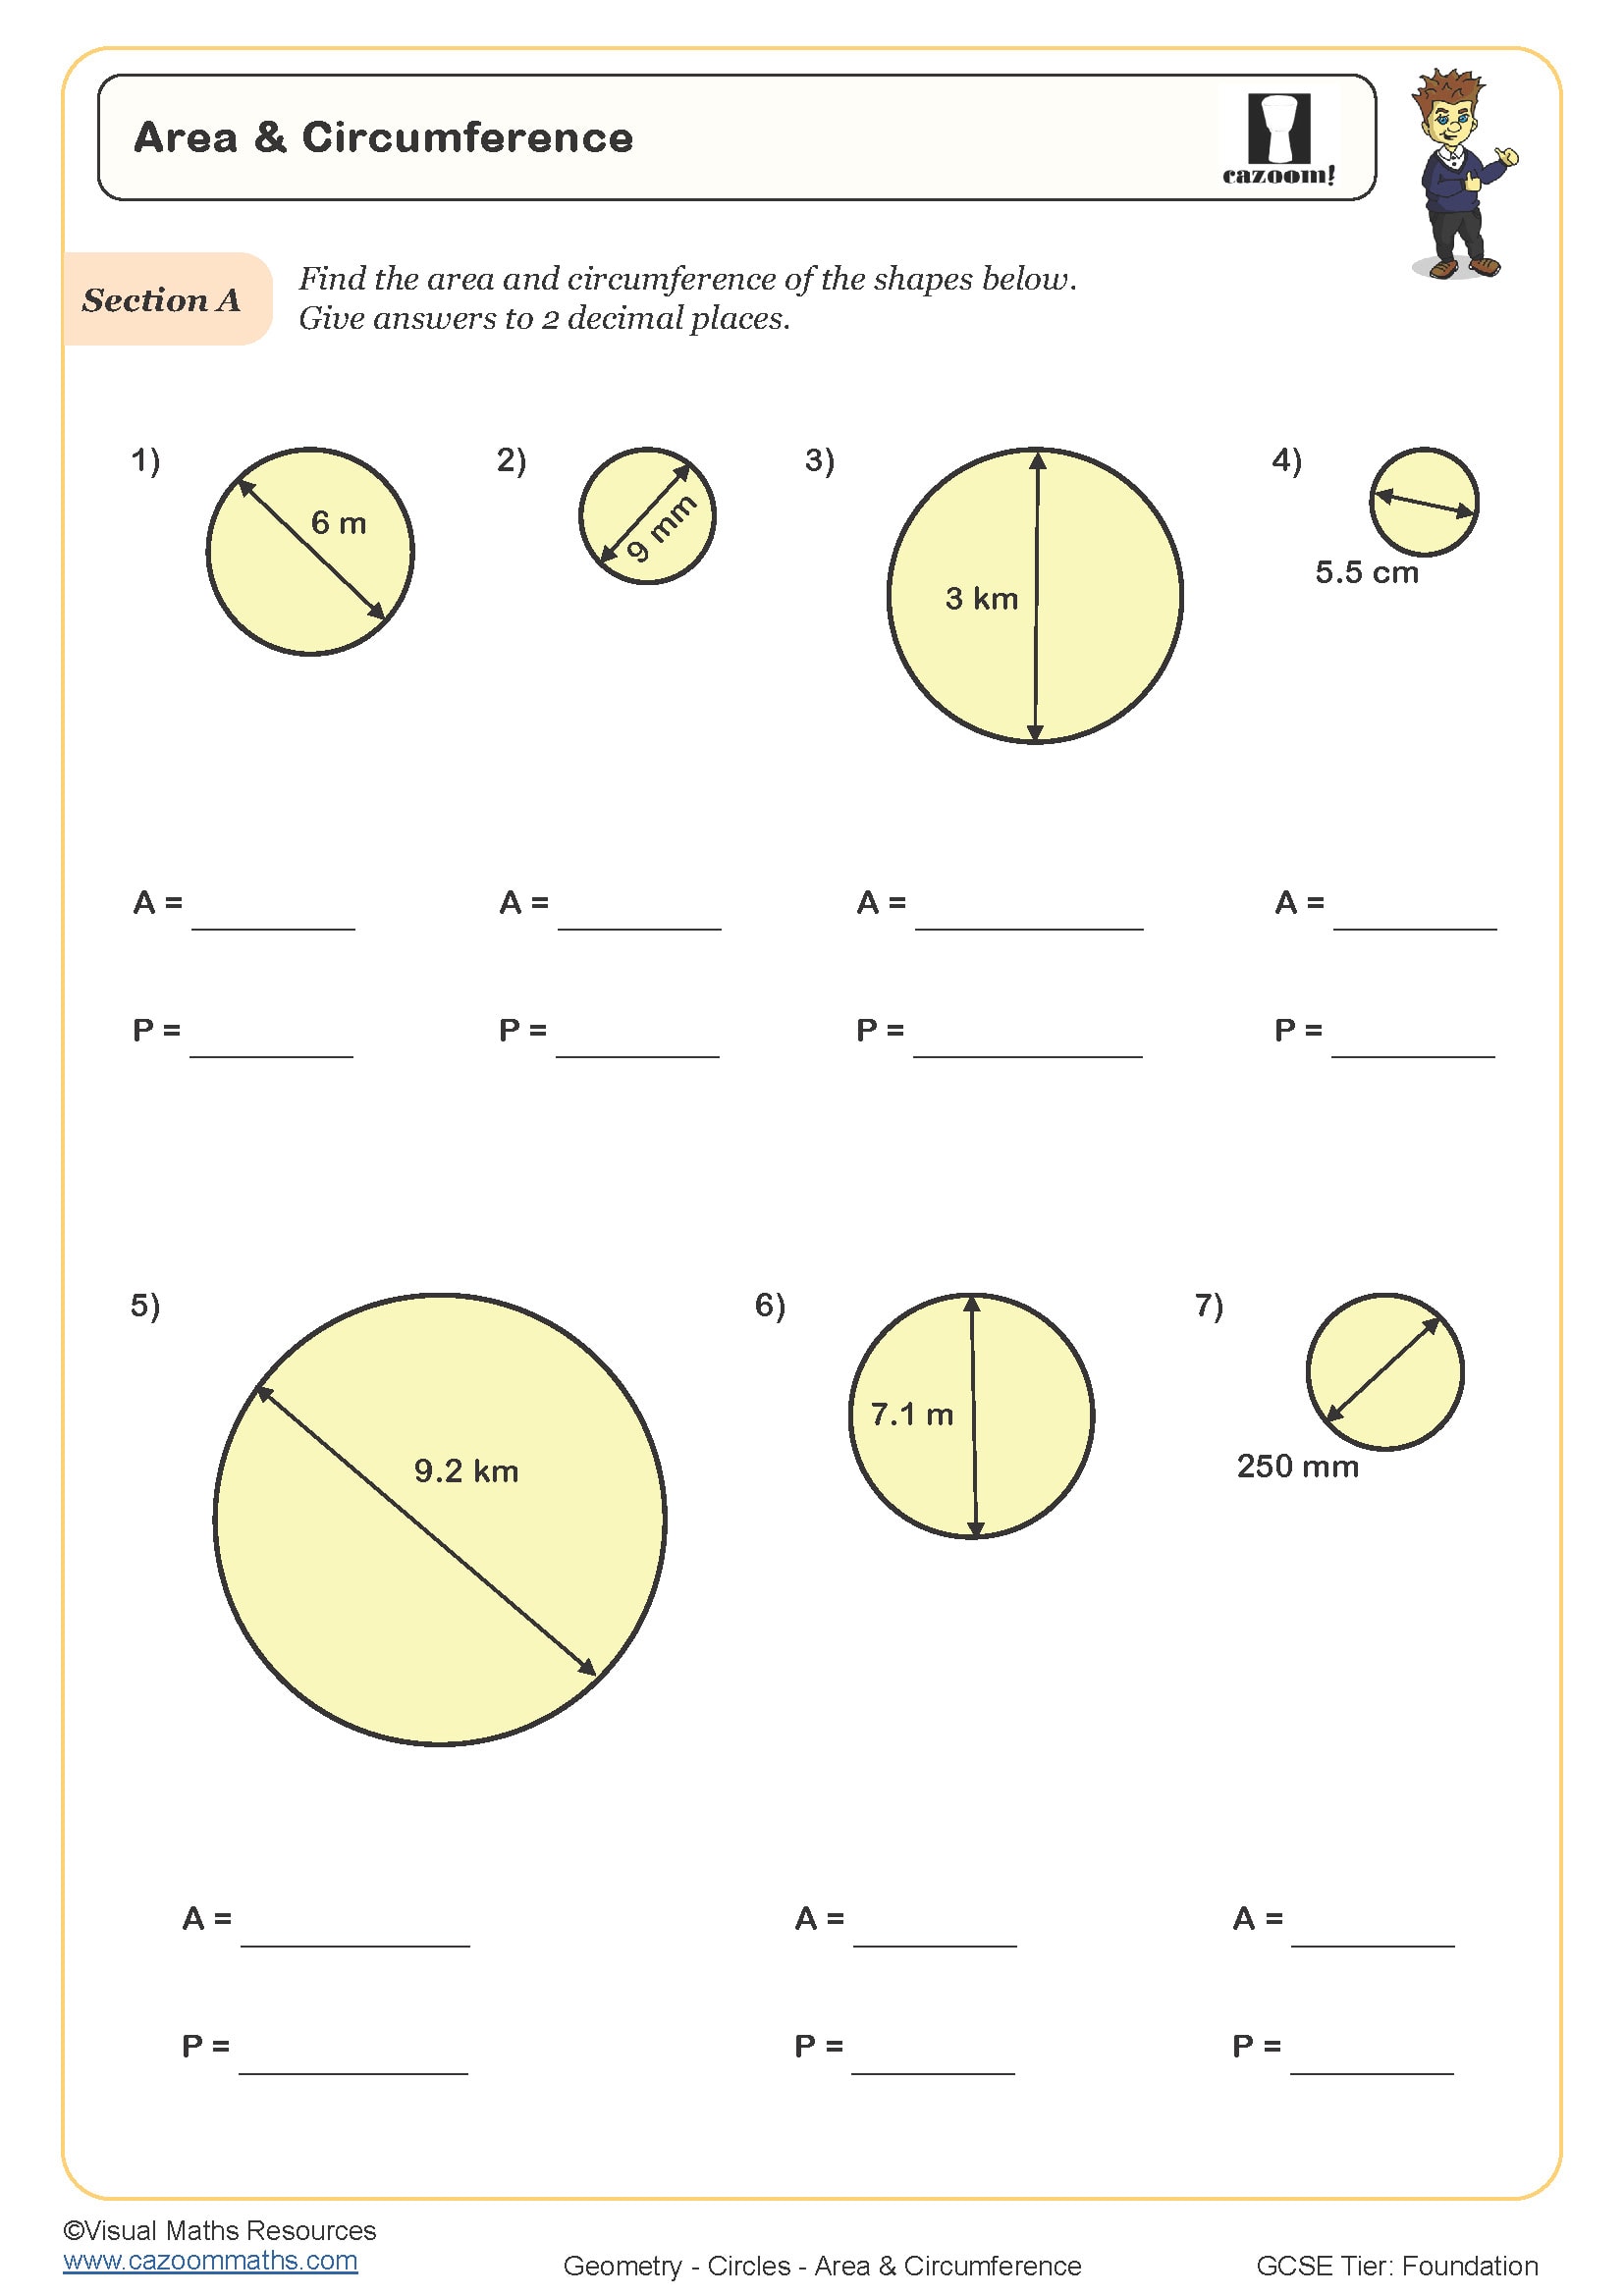 Area and Circumference Worksheet suitable for students in KS3